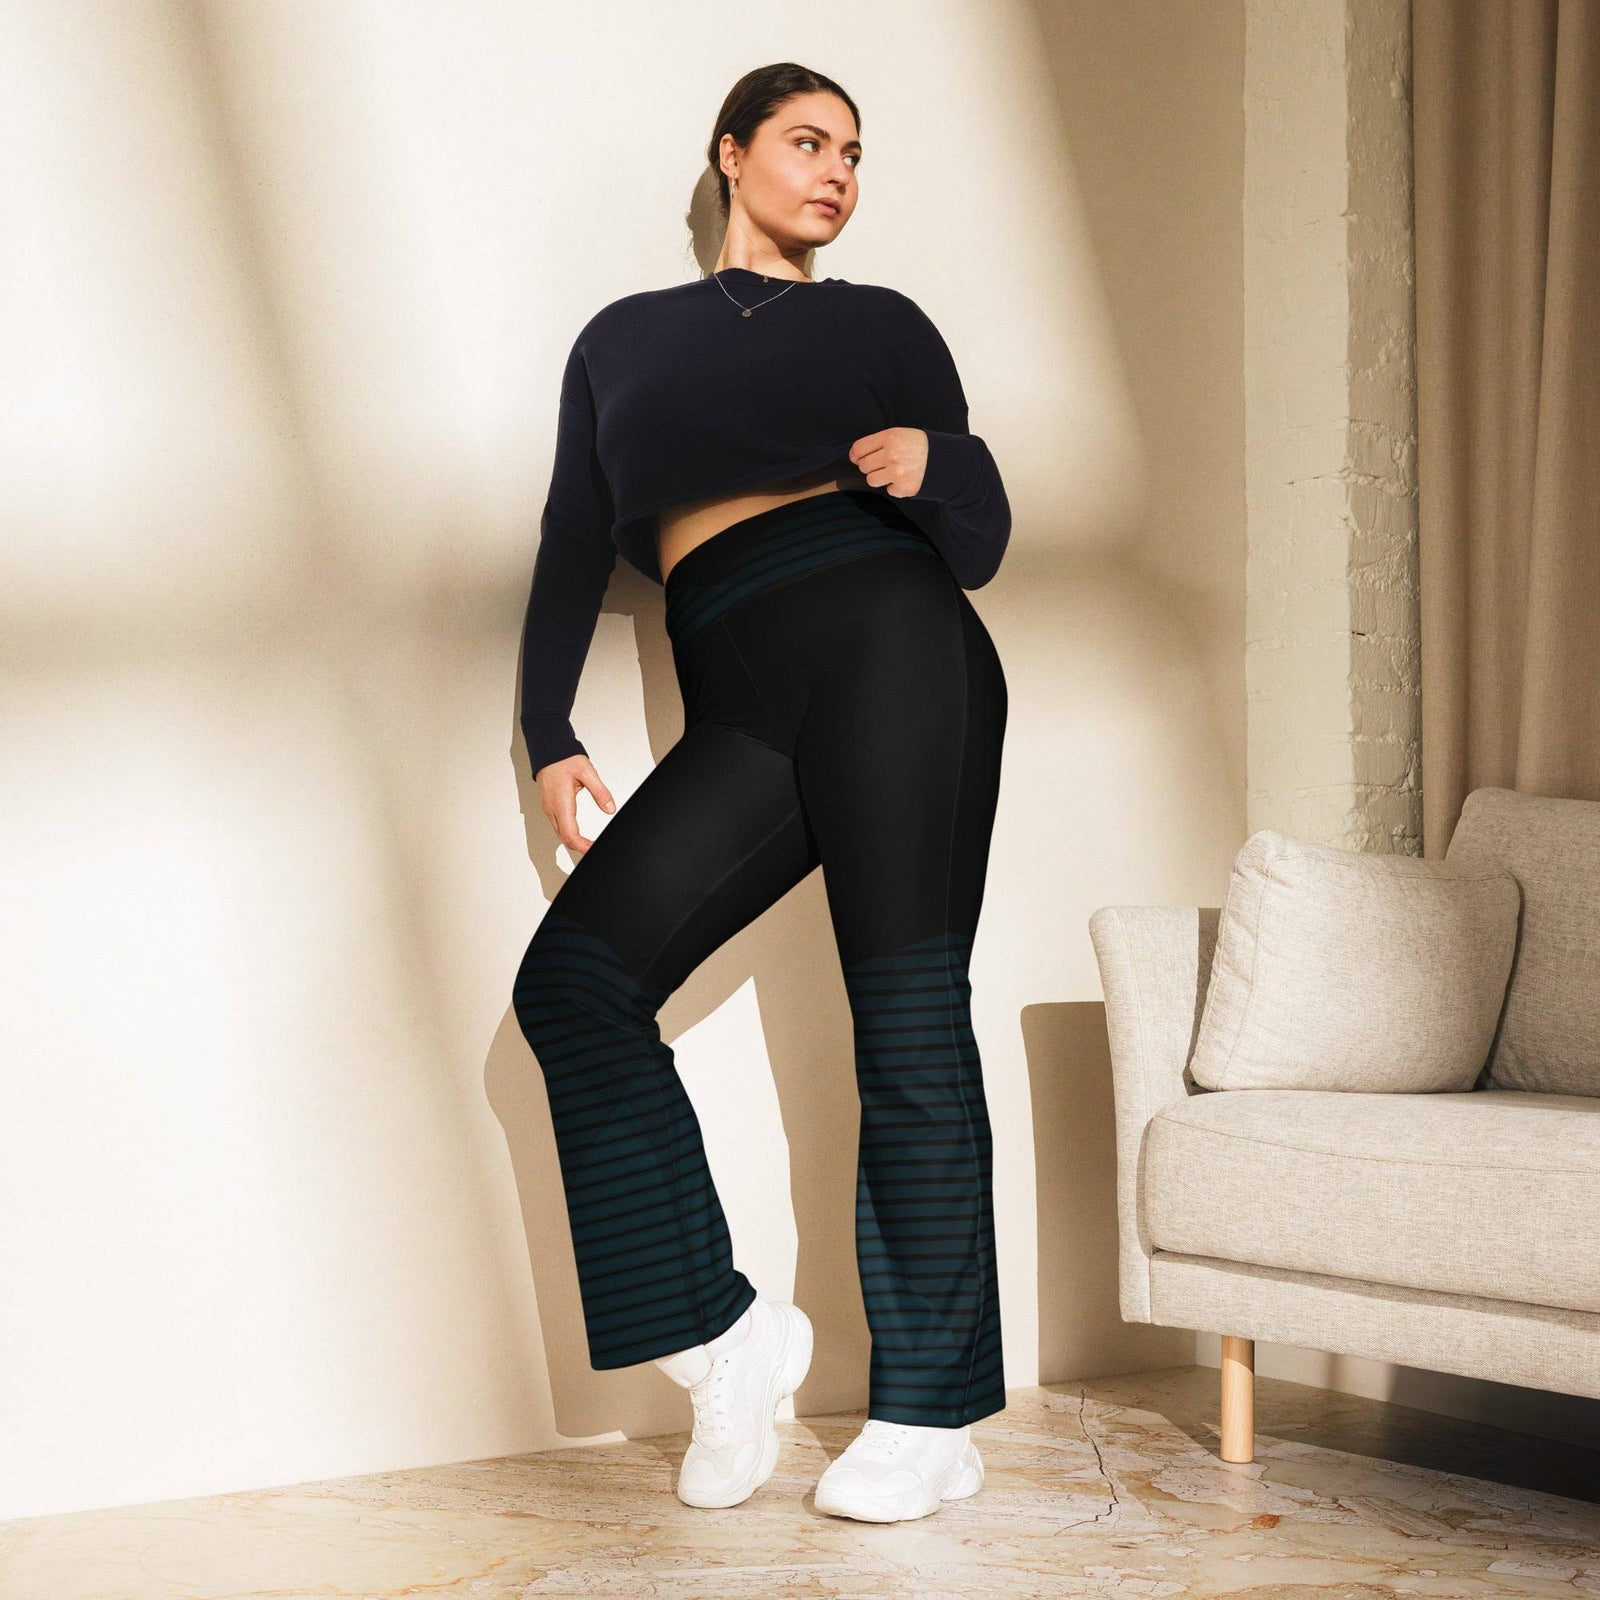 Black Flare Leggings.  Revive Wear's curve-hugging black flared leggings feature an on-trend flared cut that lifts and shapes. Shop from small to plus sizes with free shipping.